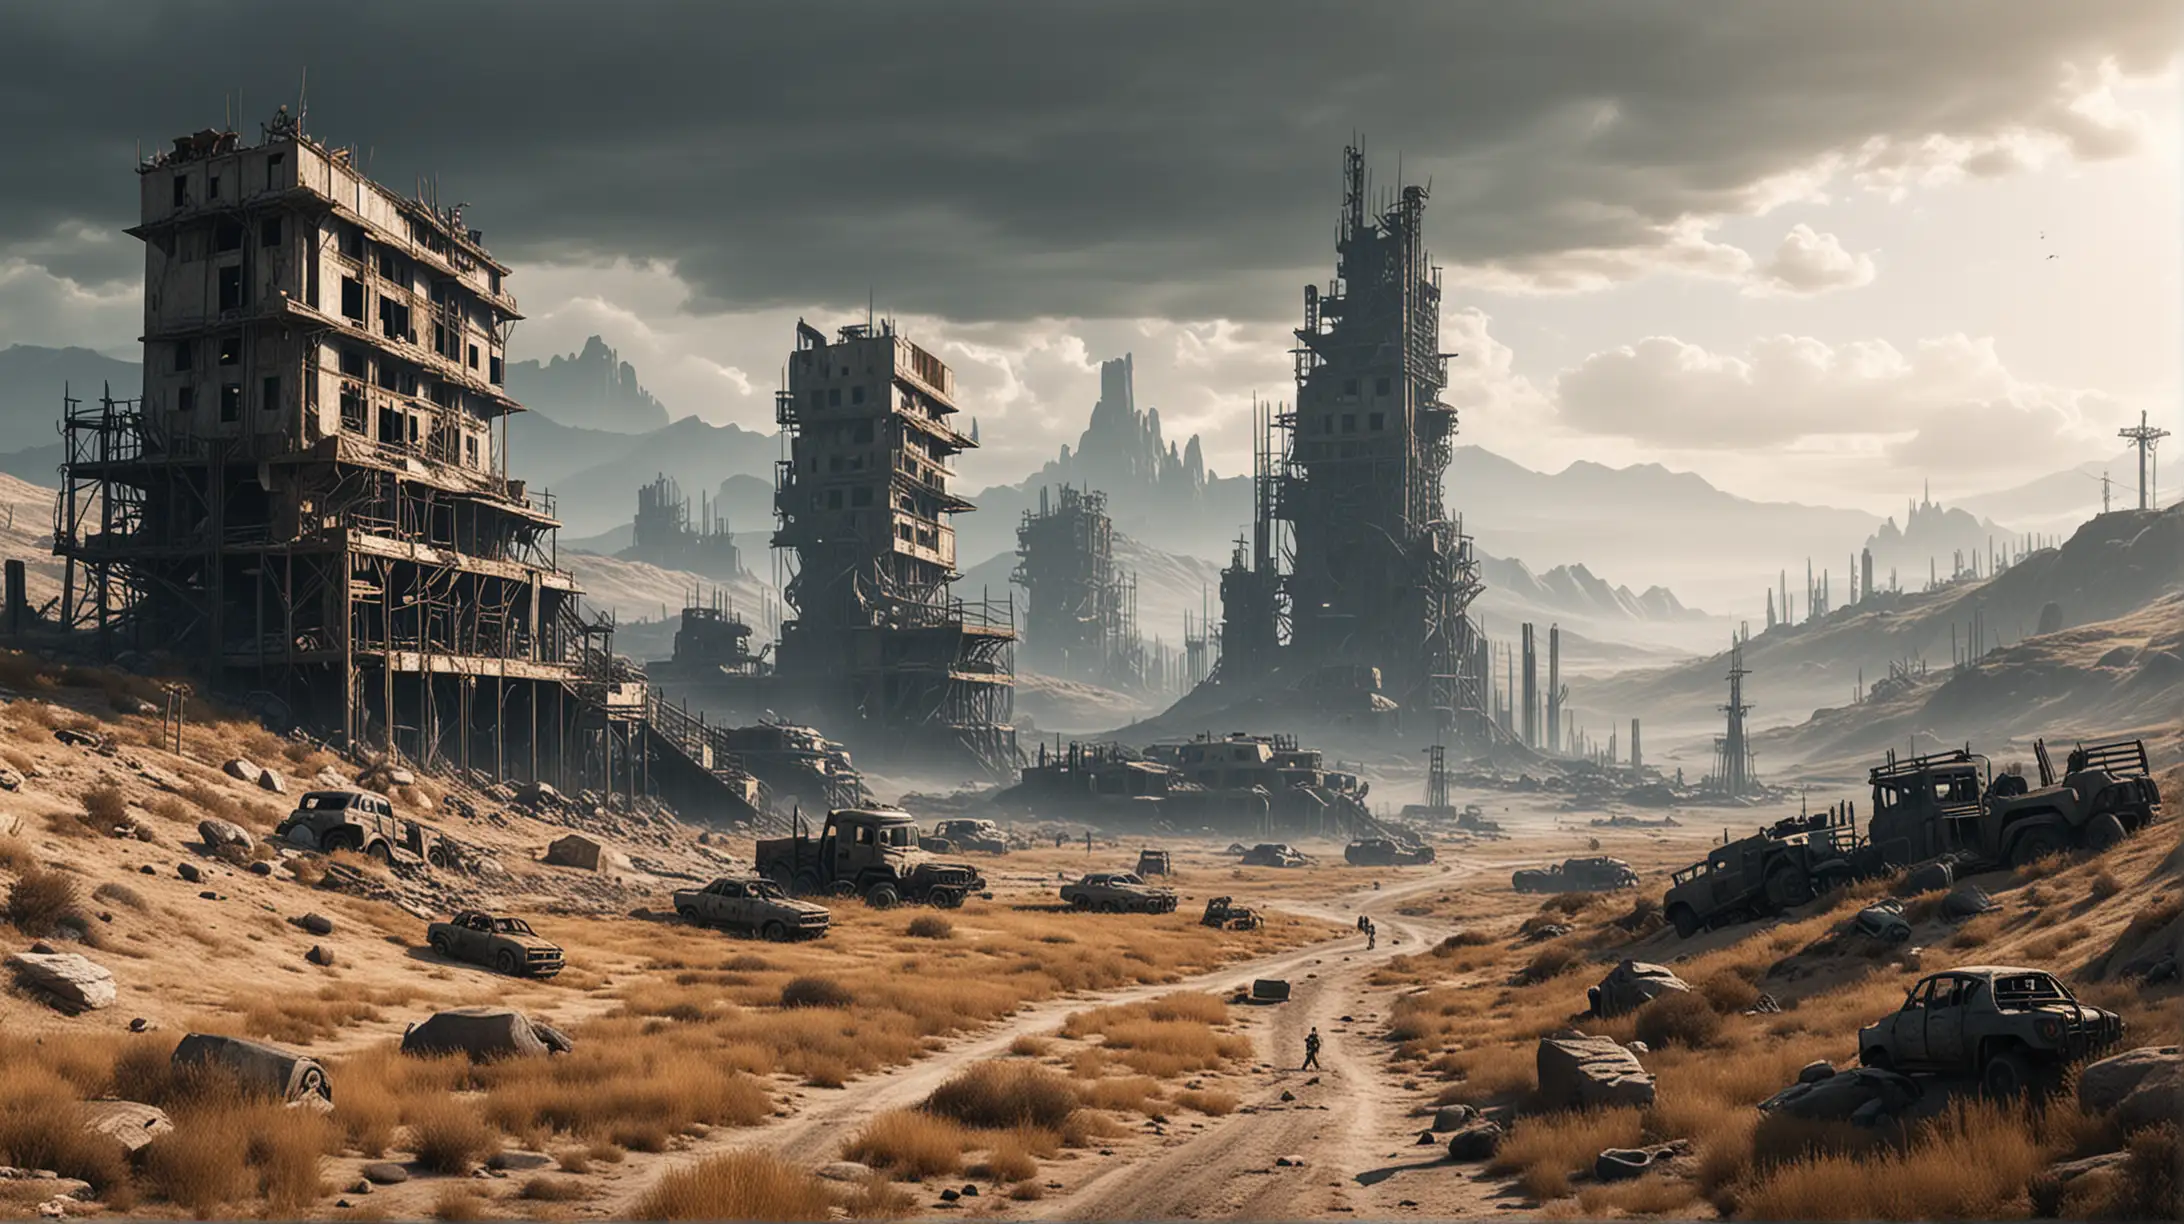 PostApocalyptic Landscape with Futuristic Architecture and Rolling Hills